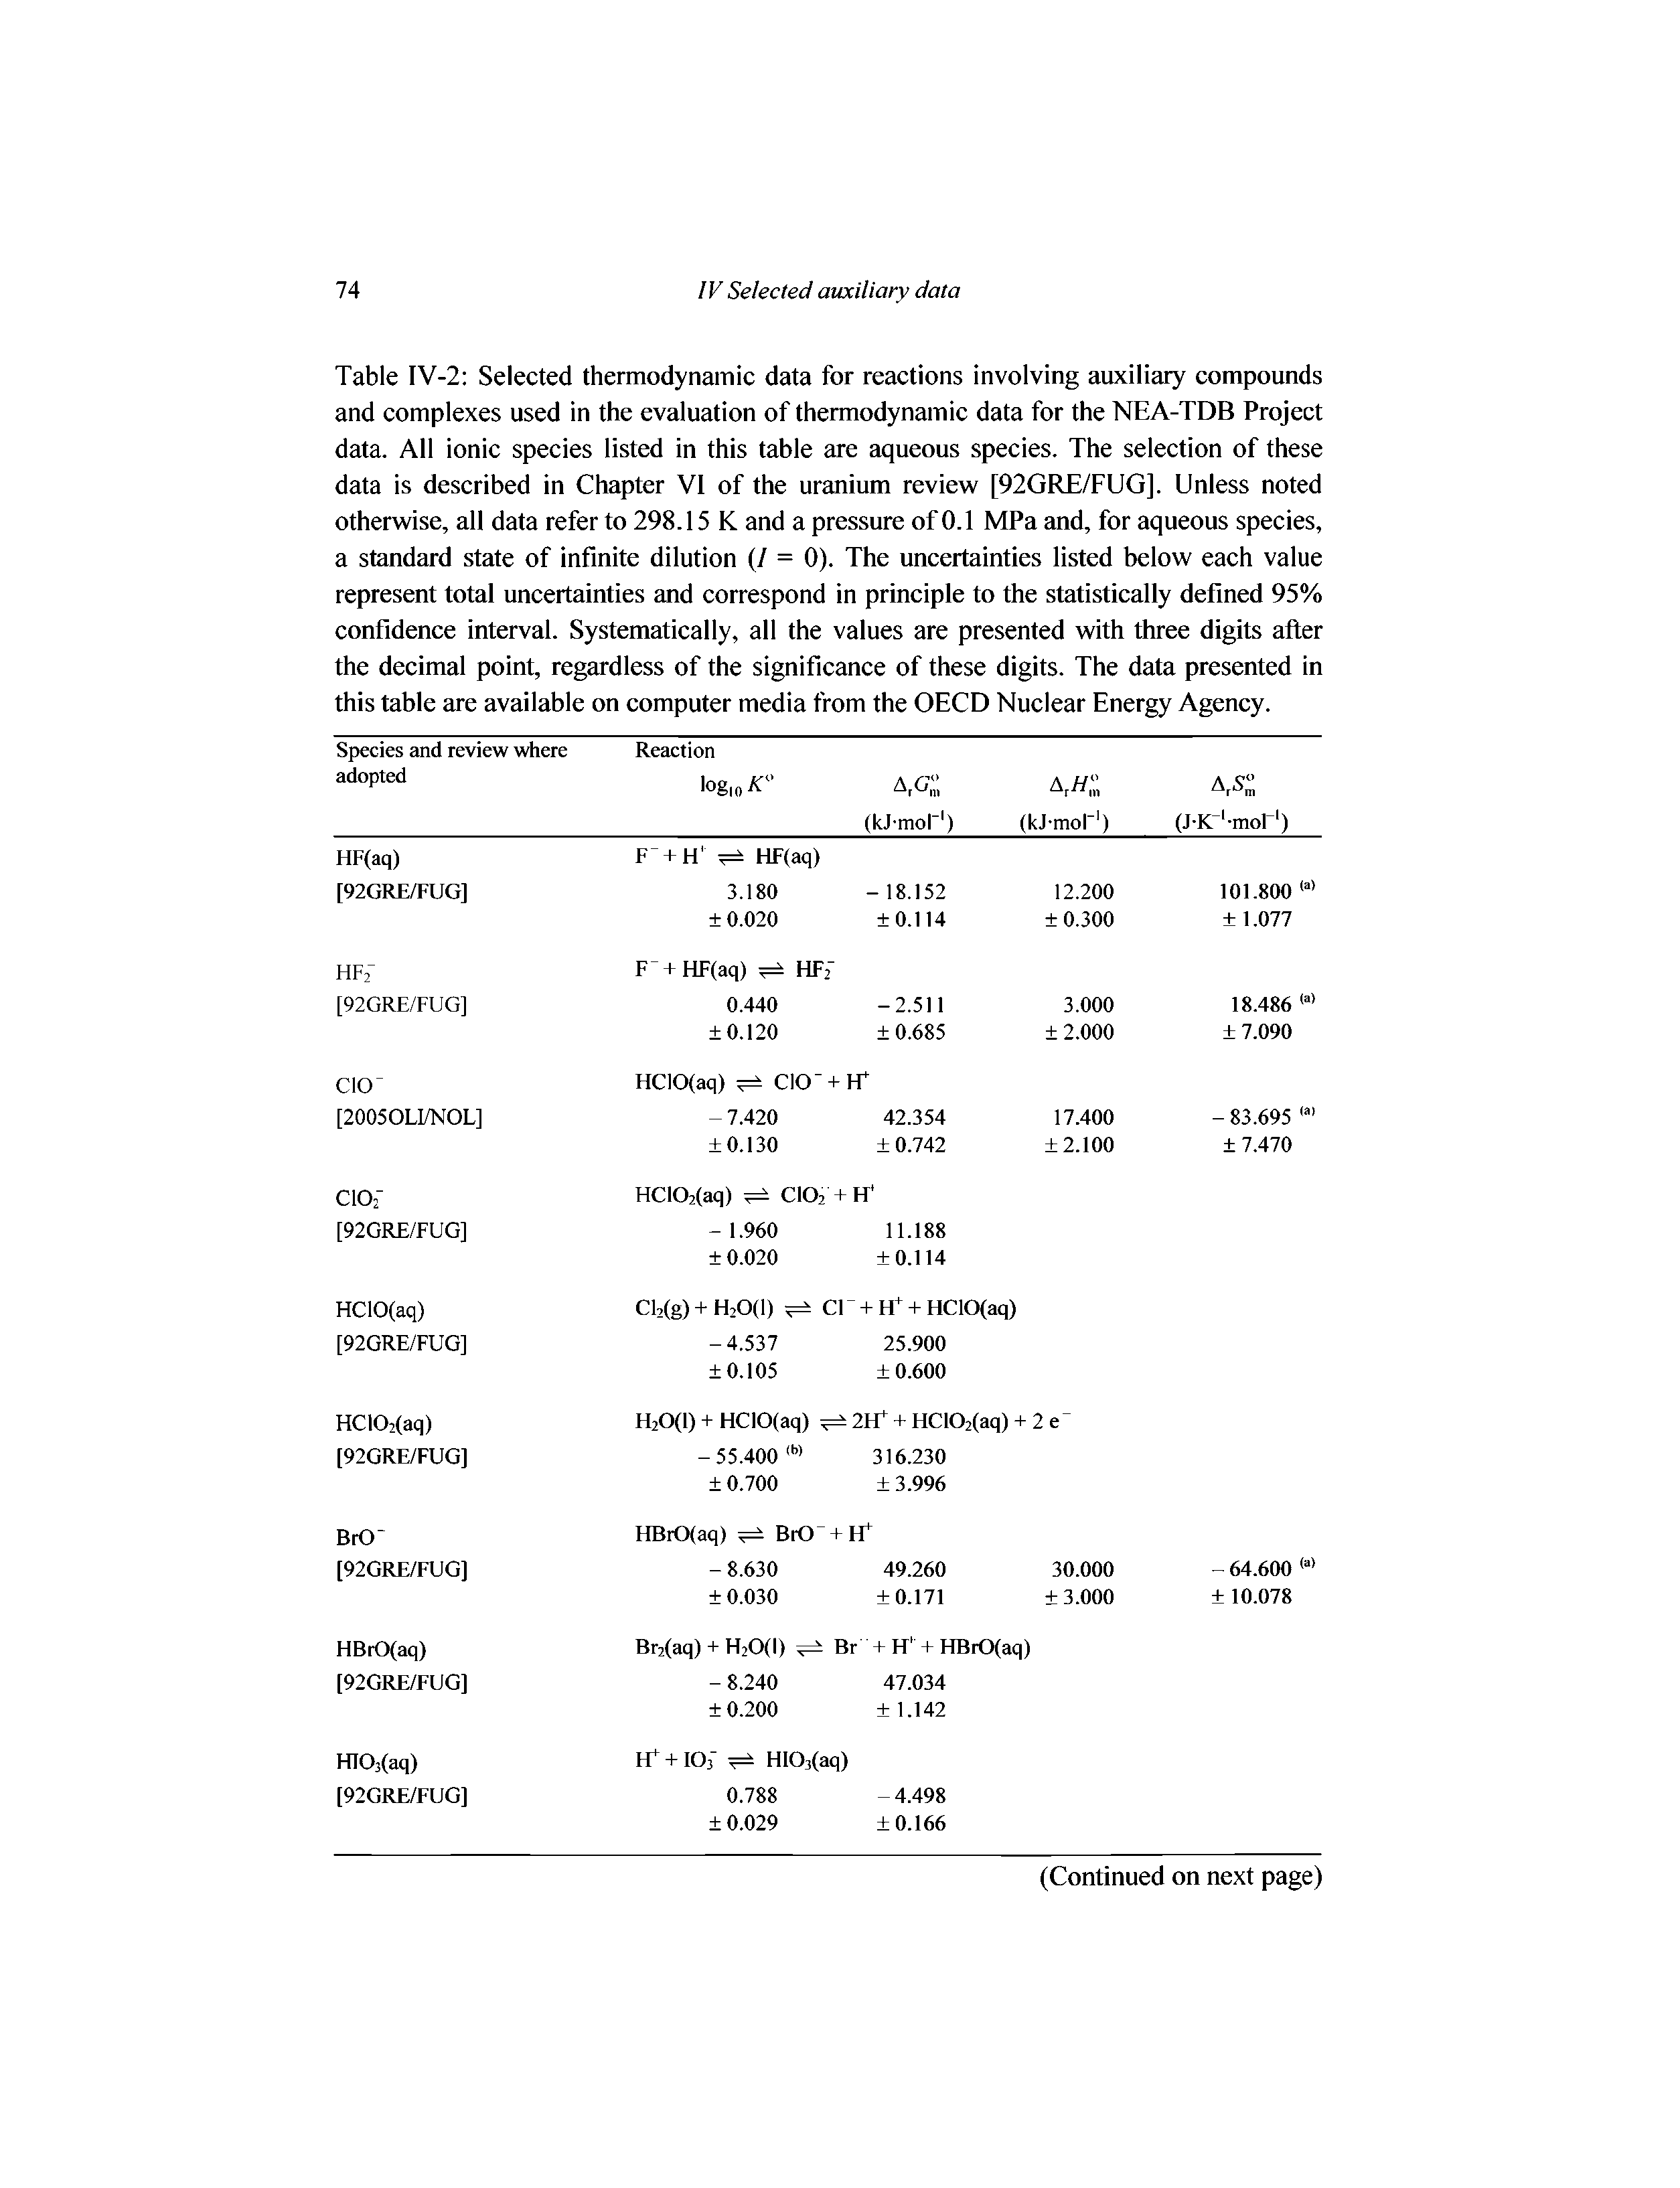 Table IV-2 Selected thermodynamic data for reactions involving auxiliary compounds...